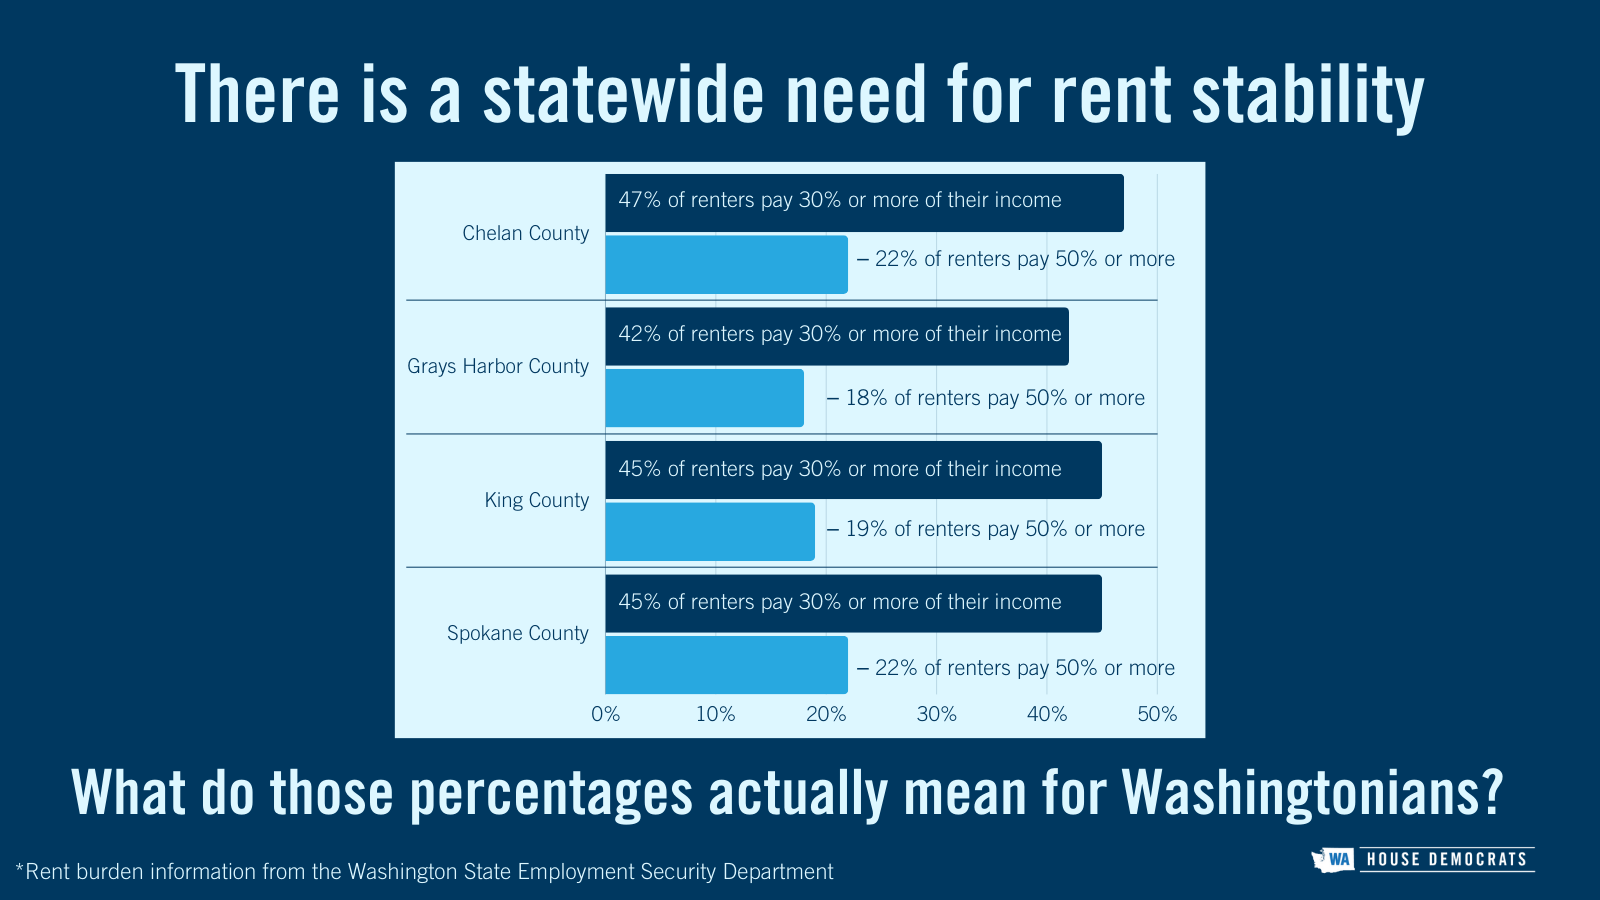 Rent stabilization gives tenants and landlords a steady and predictable plan. One in three Washingtonians are renters, with nearly half paying 30% or more of their monthly income. 20% of renters pay more than half of their income. Rent stabilization would cap rent increases at 7% annually, provided longer notices for rent increases, and maintain move-in fees and deposits at or below one month’s rent.